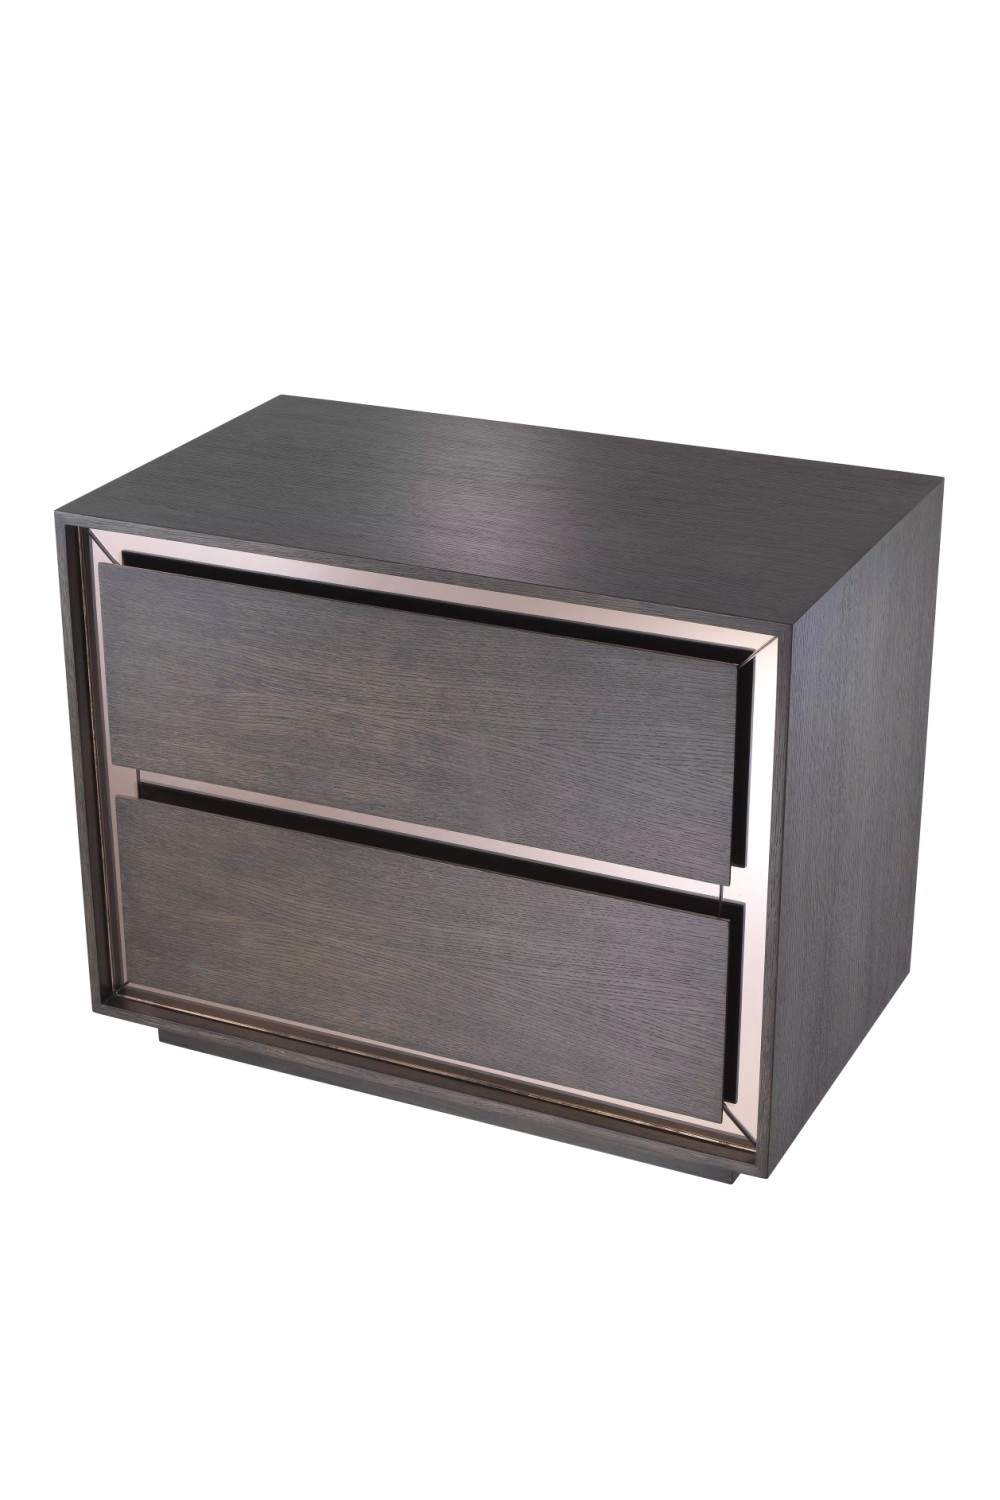 2 Drawer Wooden Side Table | Eichholtz Cabas | OROA.com